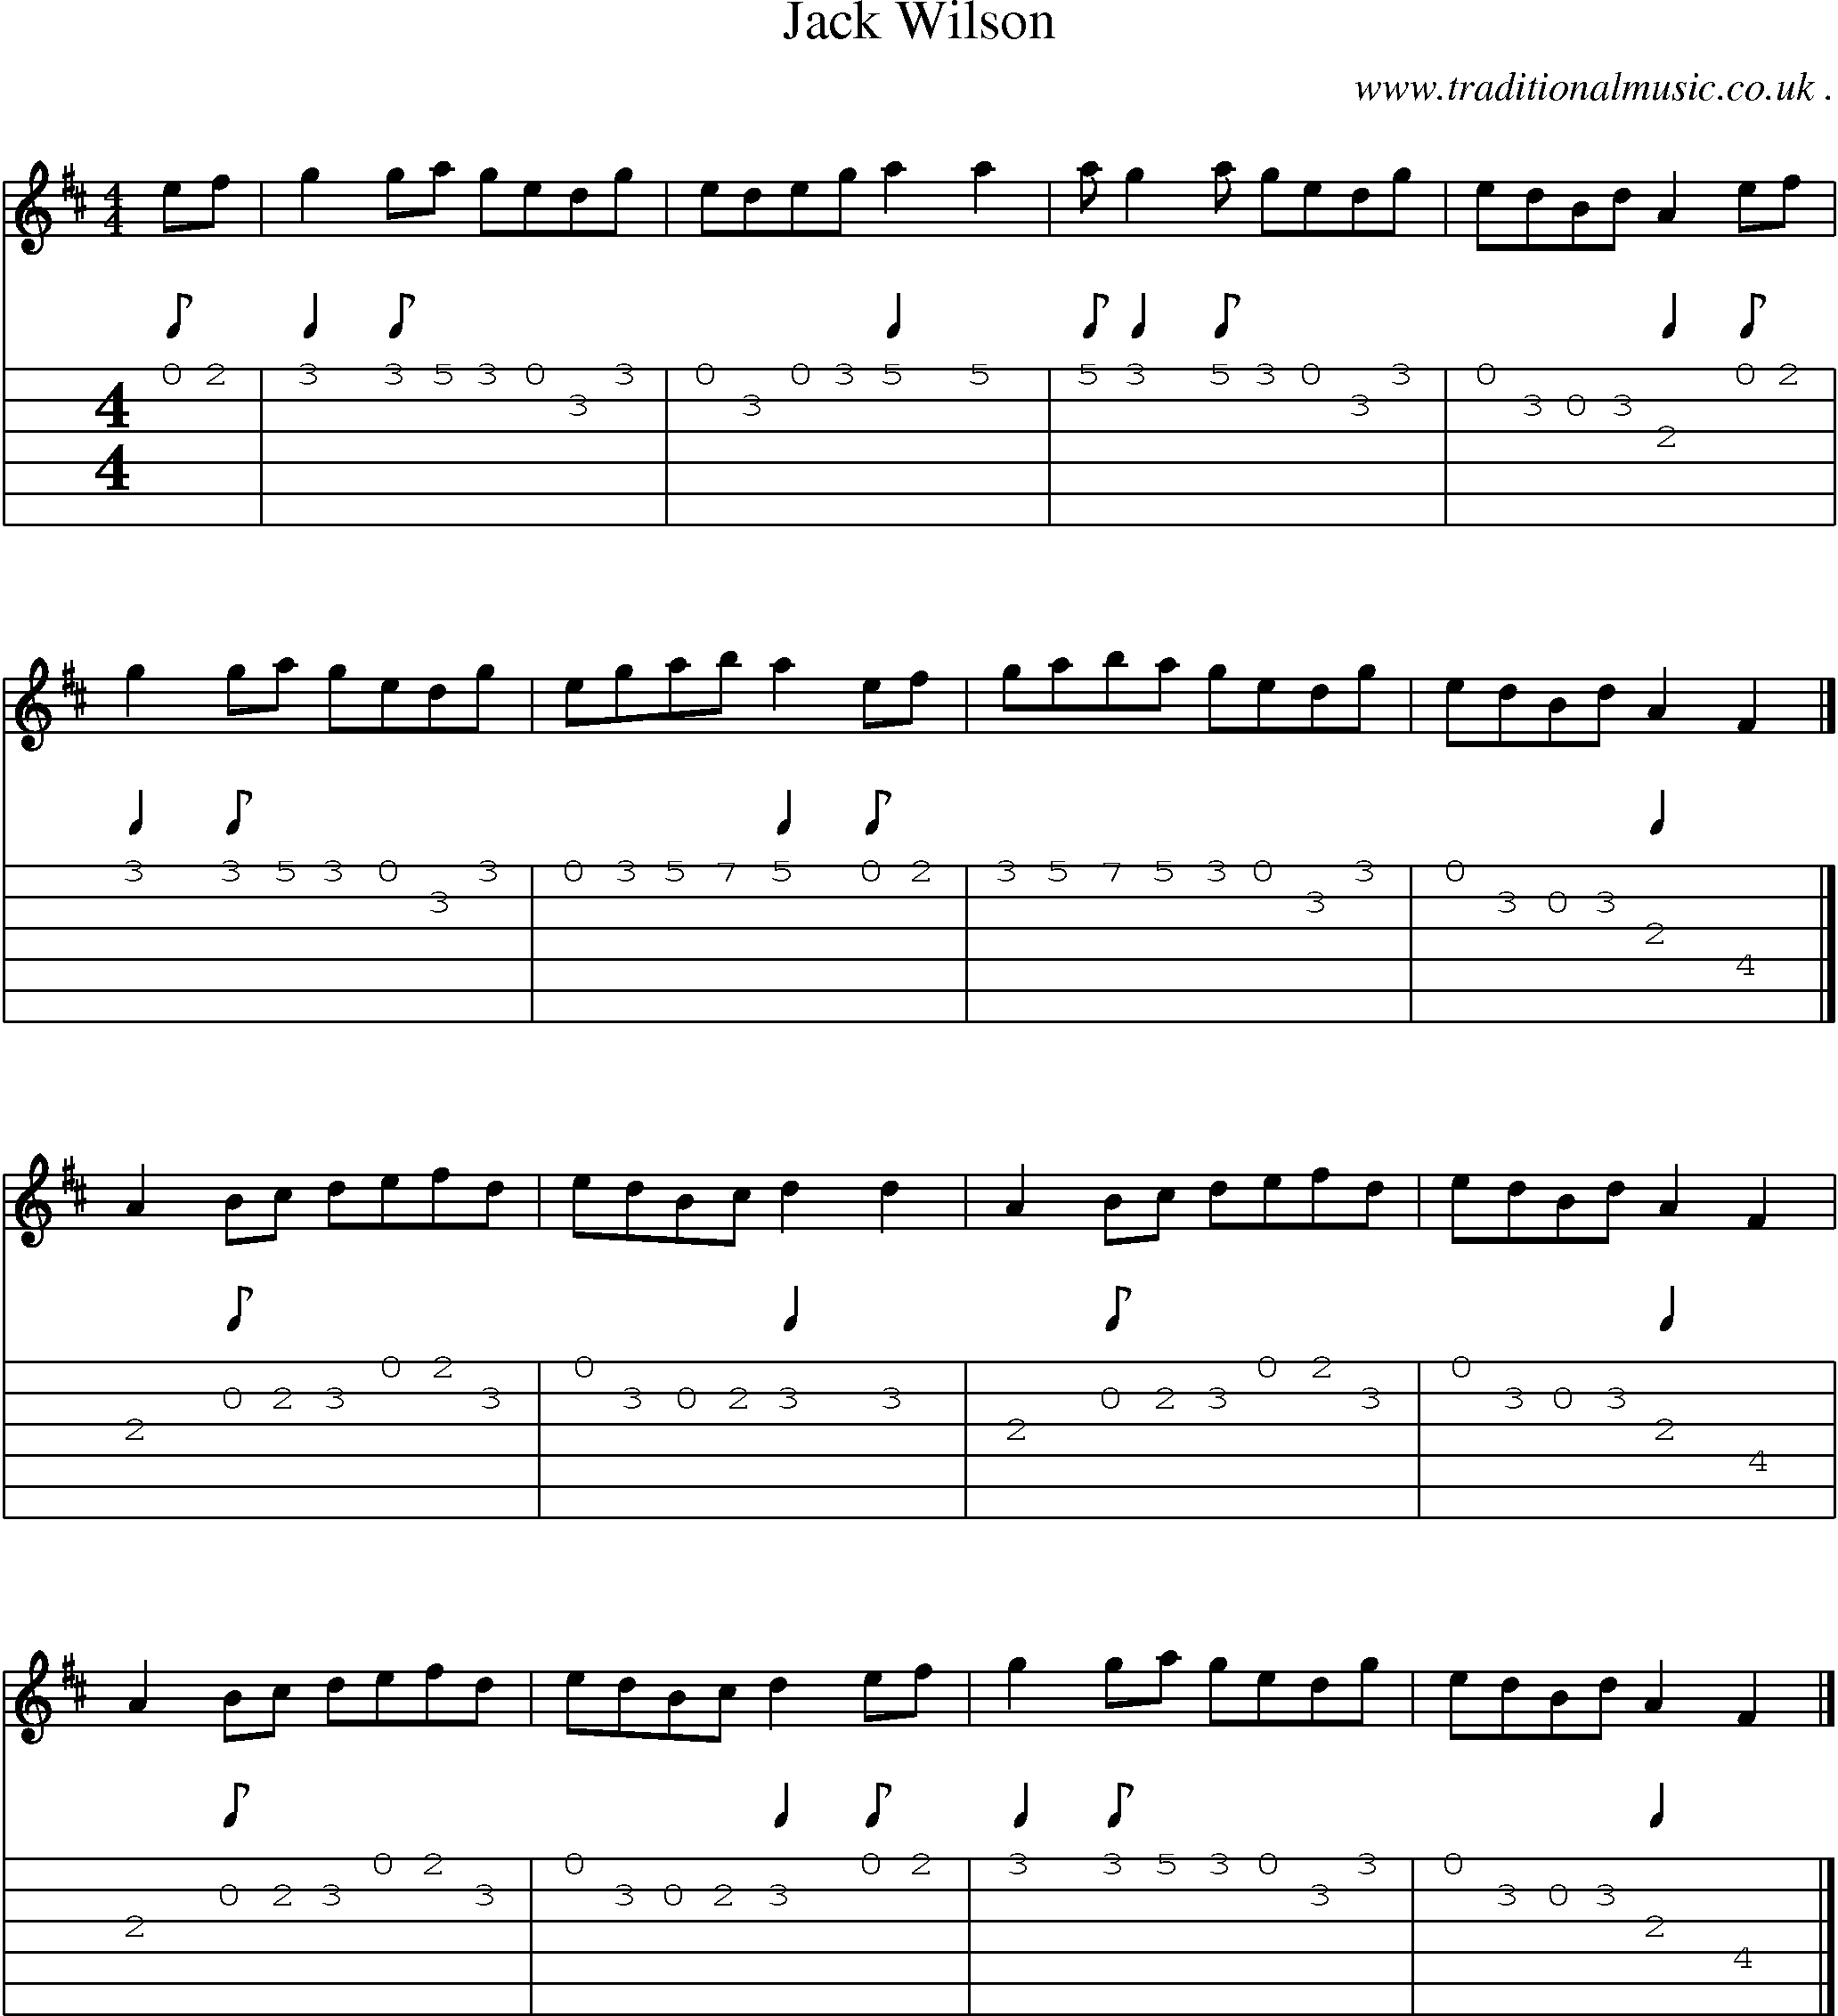 Sheet-music  score, Chords and Guitar Tabs for Jack Wilson